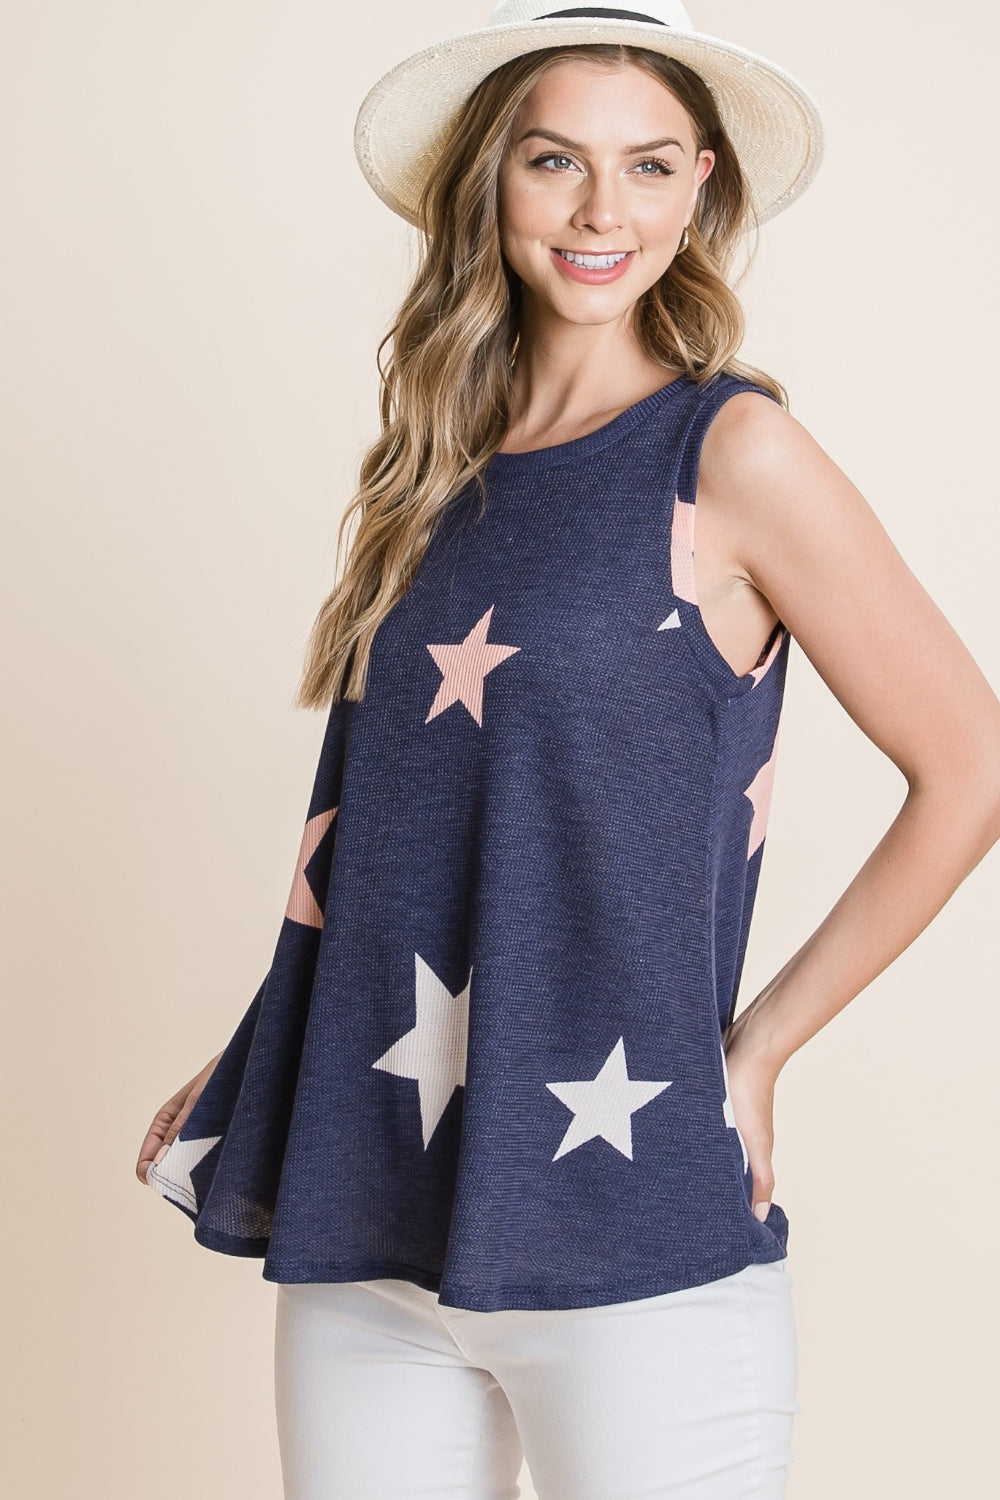 Star Print Round Neck Tank Top for Women in Navy | Tank Top | Ro + Ivy